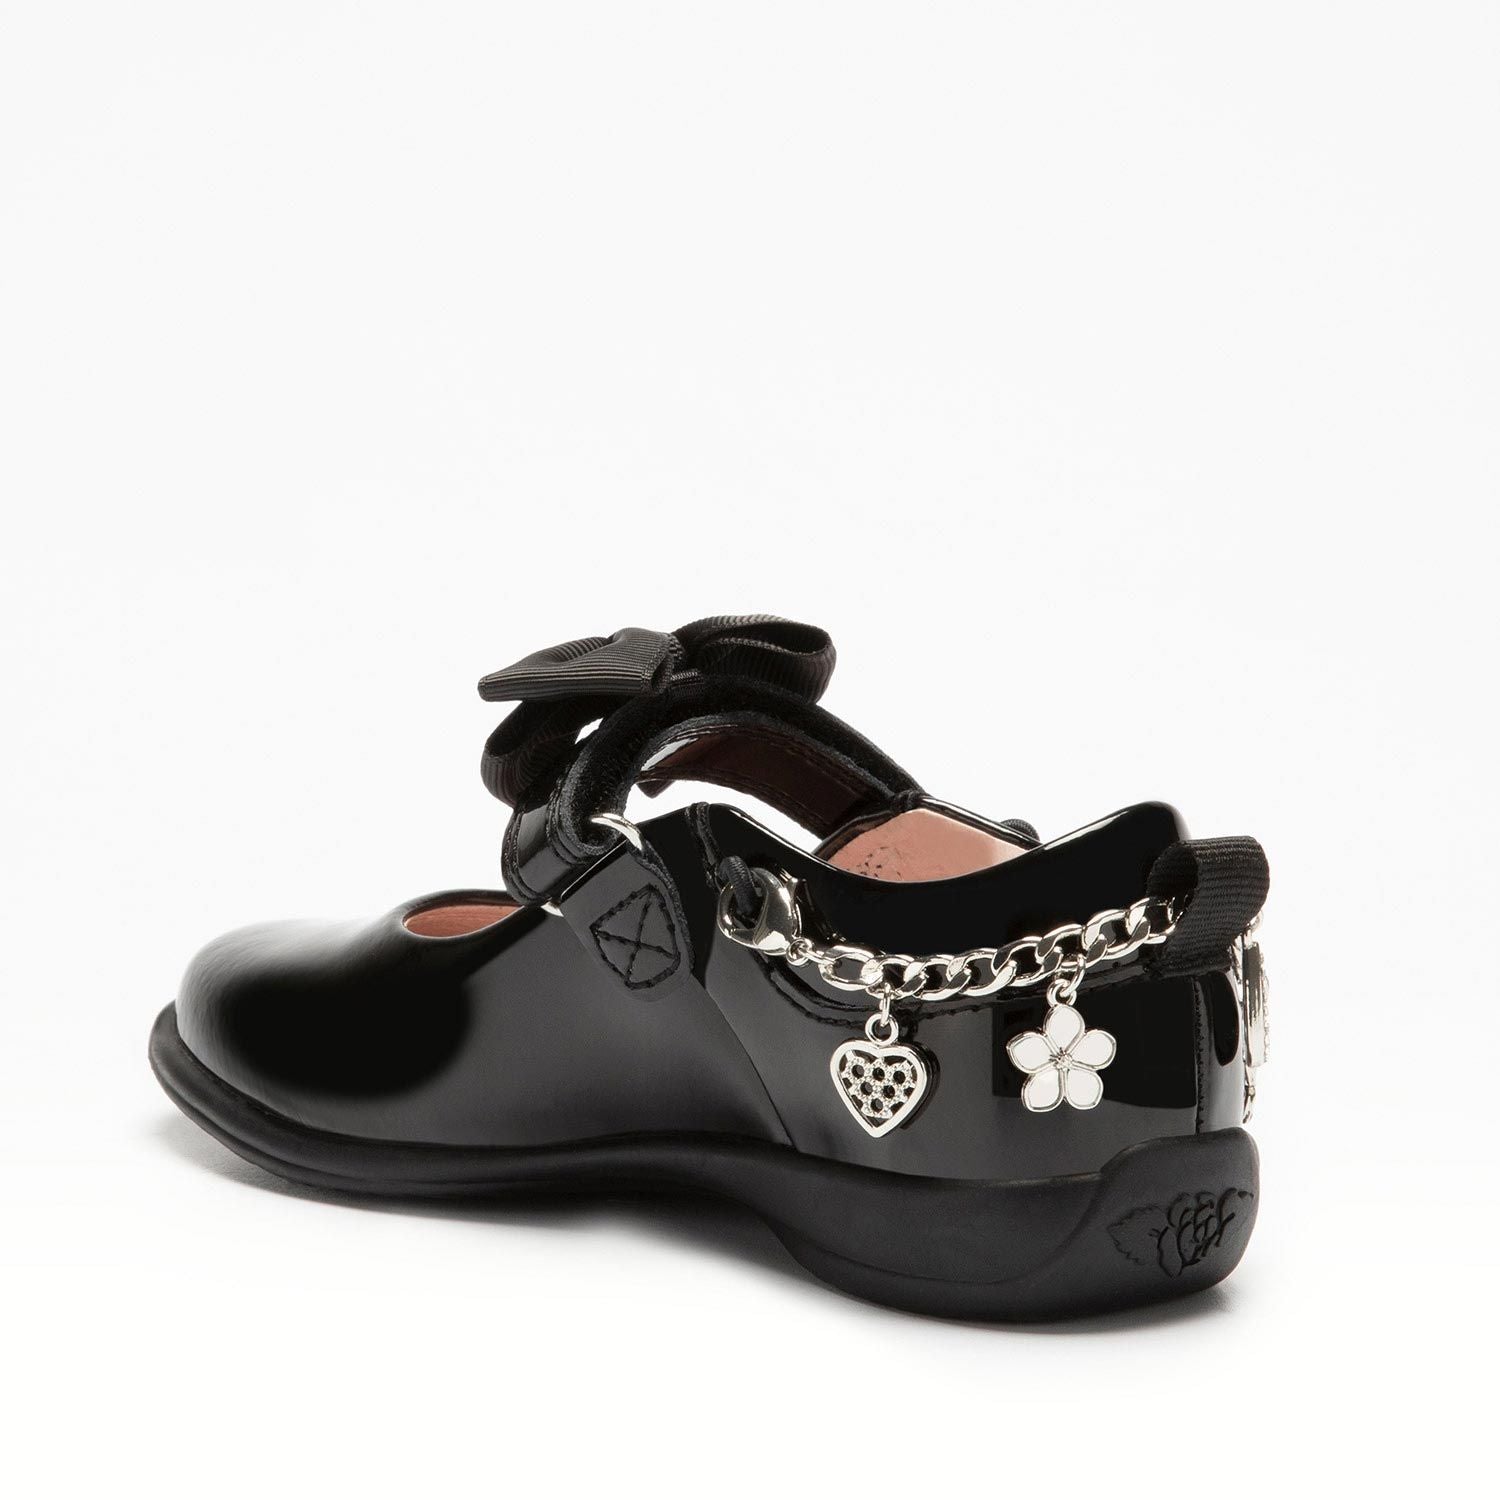 A girls Mary Jane school shoe by Lelli Kelly, style LK8219 Alicia, in black patent leather with velcro fastening and detachable fabric bow and bracelet. Angled view.